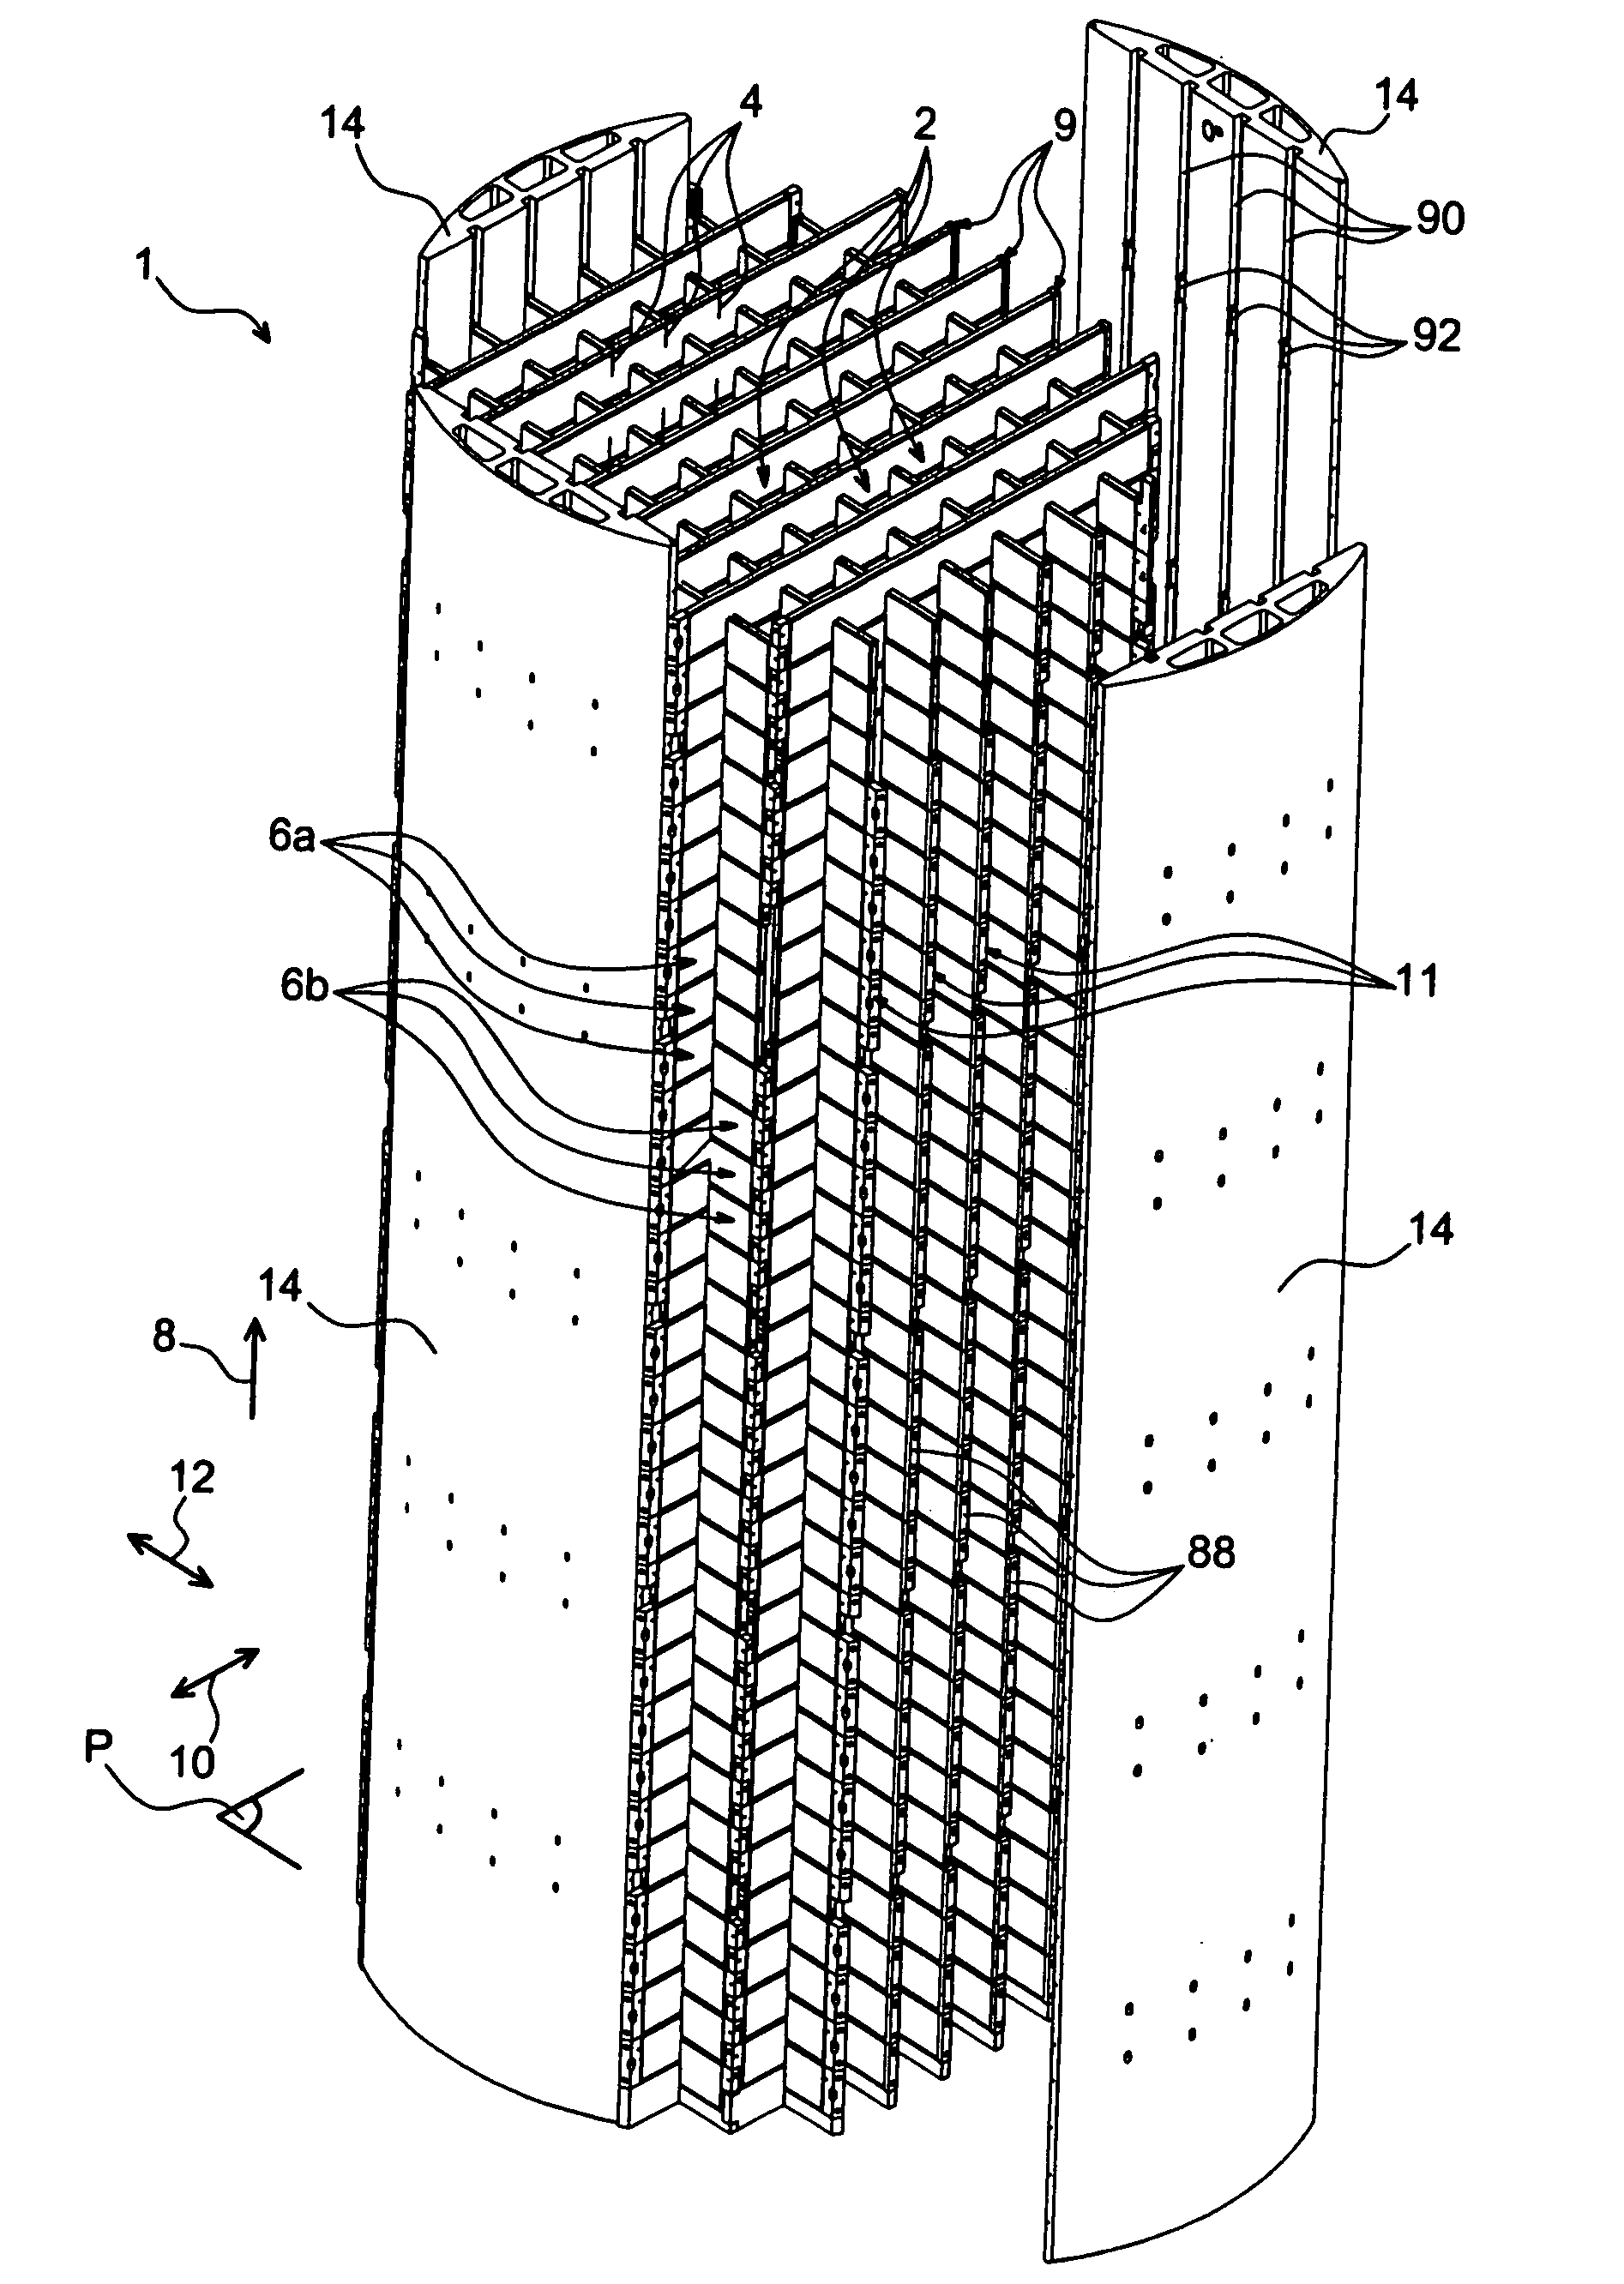 Storage device for storing and/or transporting nuclear fuel assemblies